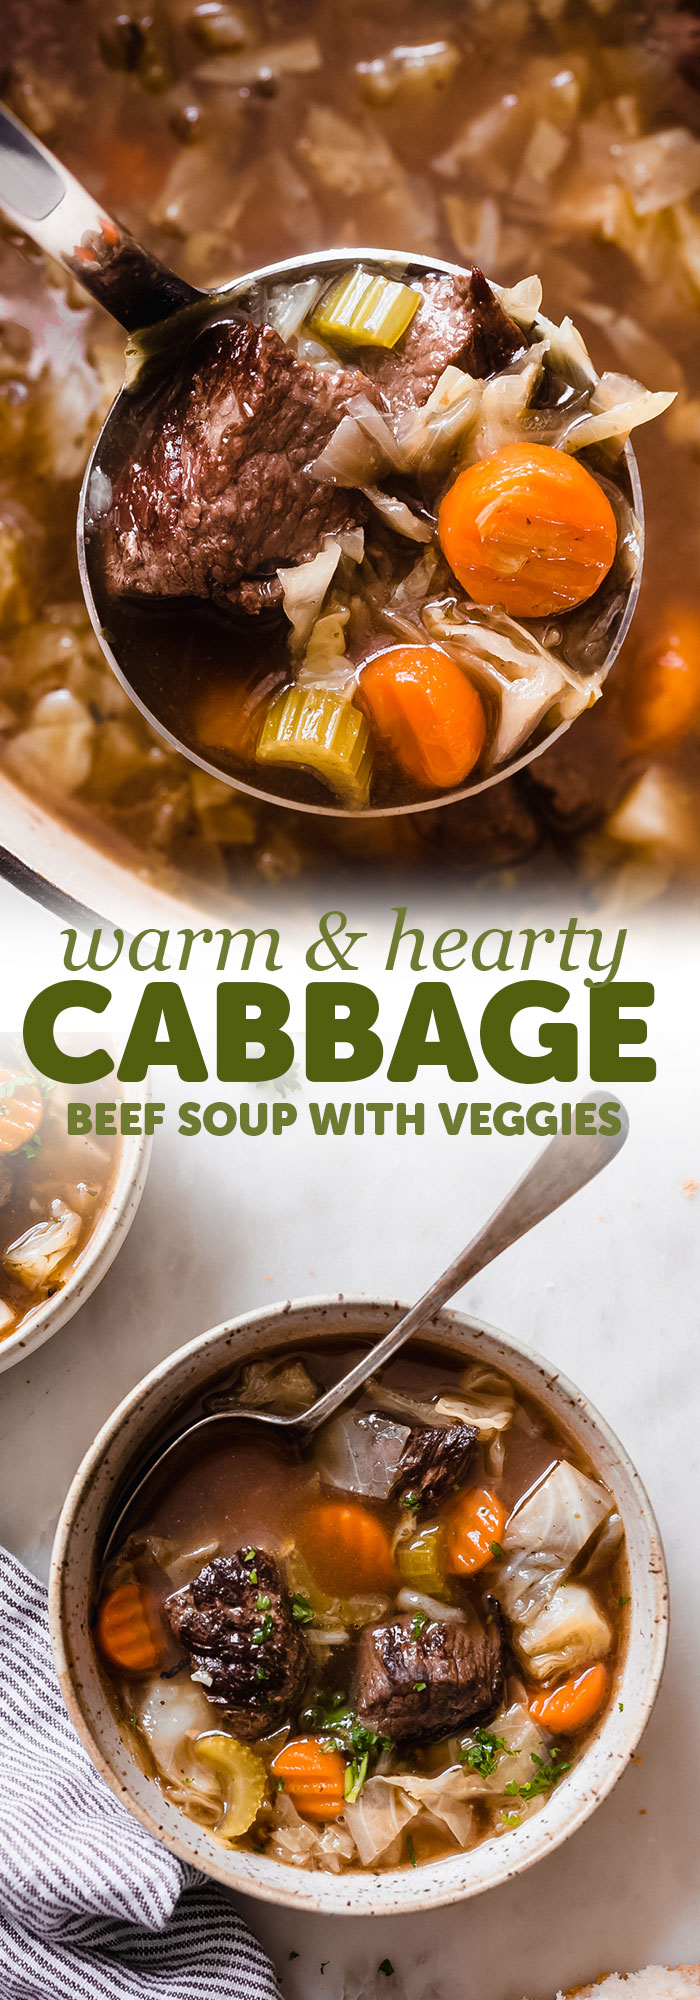 Warm & Hearty Cabbage Beef Soup - a cabbage beef soup that's big on flavor but light on the waistline. Loaded with tons of aromatics this soup is perfect for when you need something low carb but big on flavor! #cabbagesoup #cabbagebeefsoup #soup #souprecipes #beefsoup | Littlespicejar.com